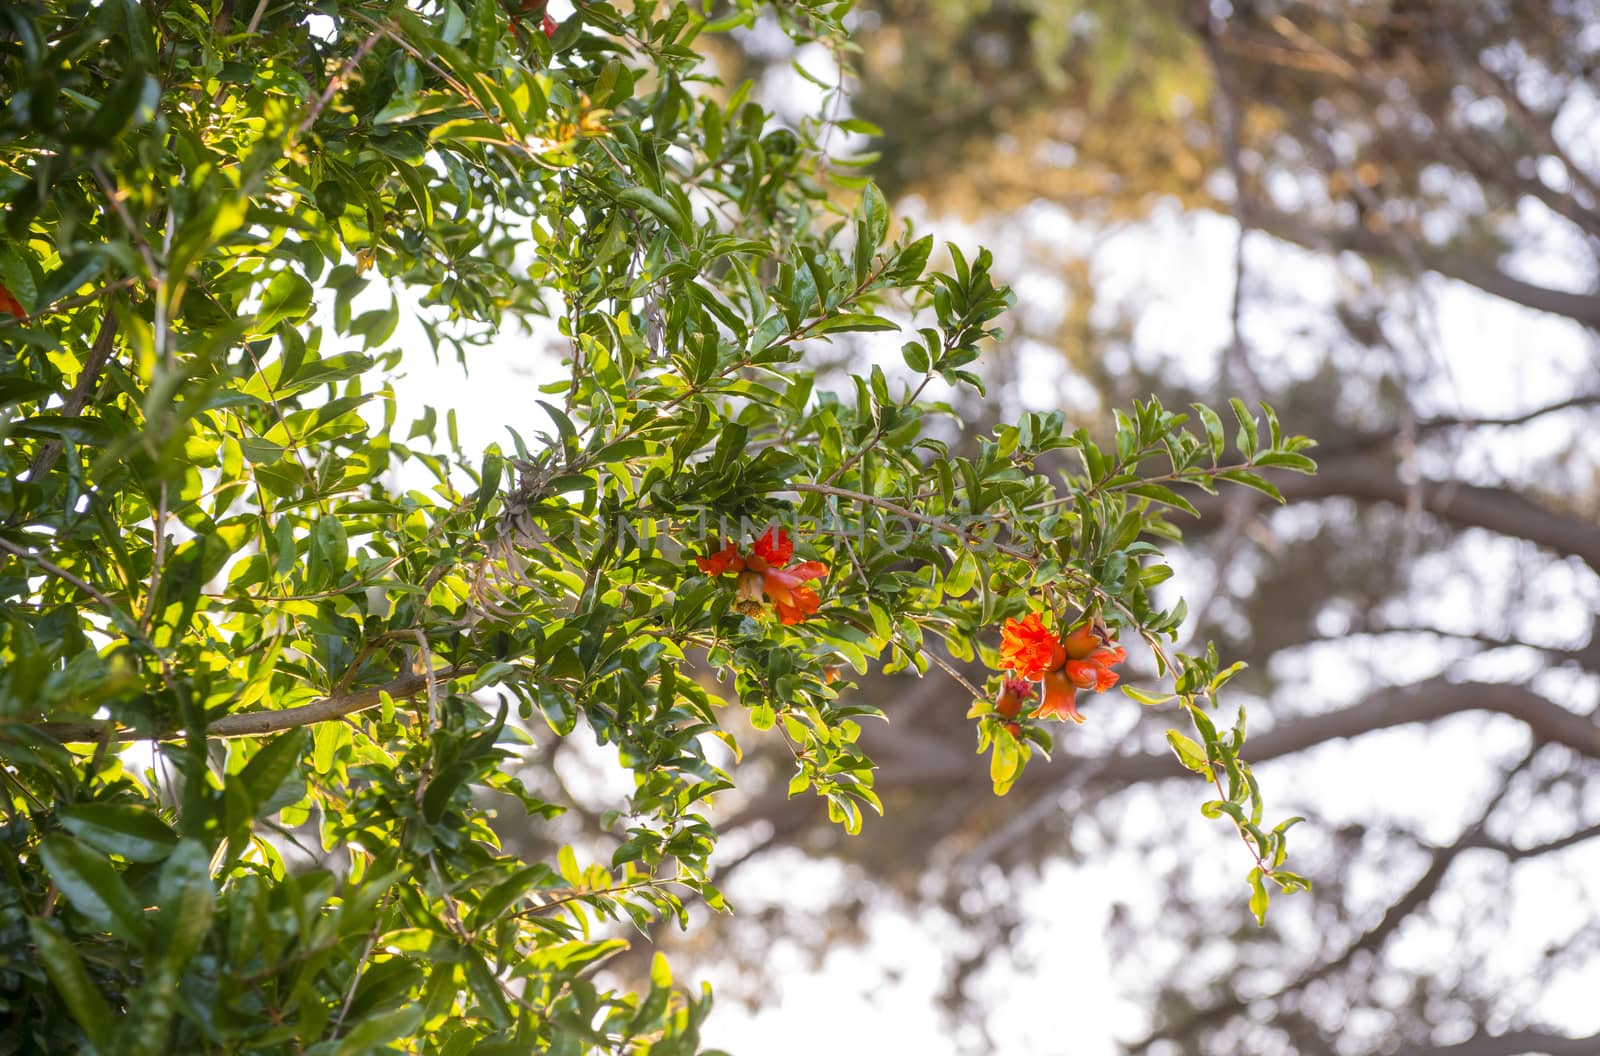 Pomegranate (Punica granatum) tree with fruit and flower blossoms